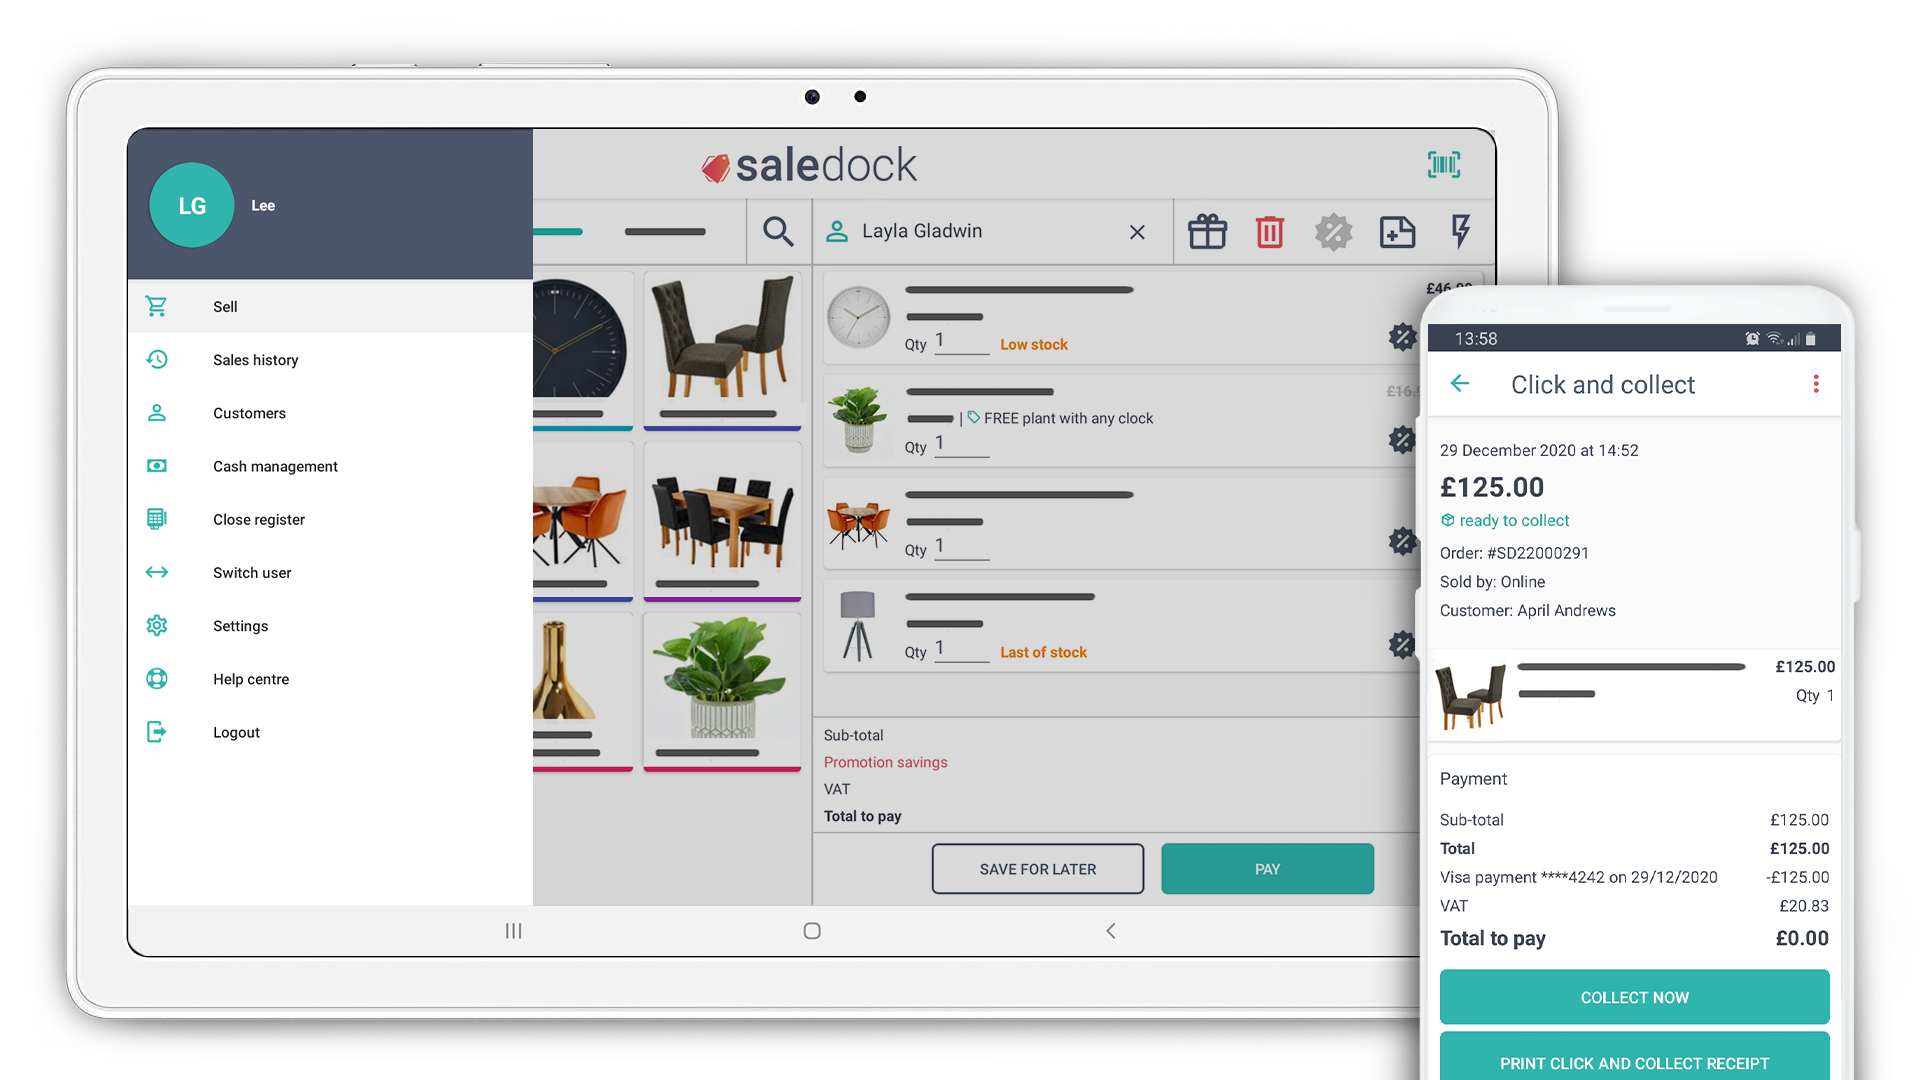 Saledock ePOS available on tablet and phone - Process click and collect orders straight from your ePOS device. Create omni-channel promotions, single or whole order discounts and track stock levels on your ePOS device.